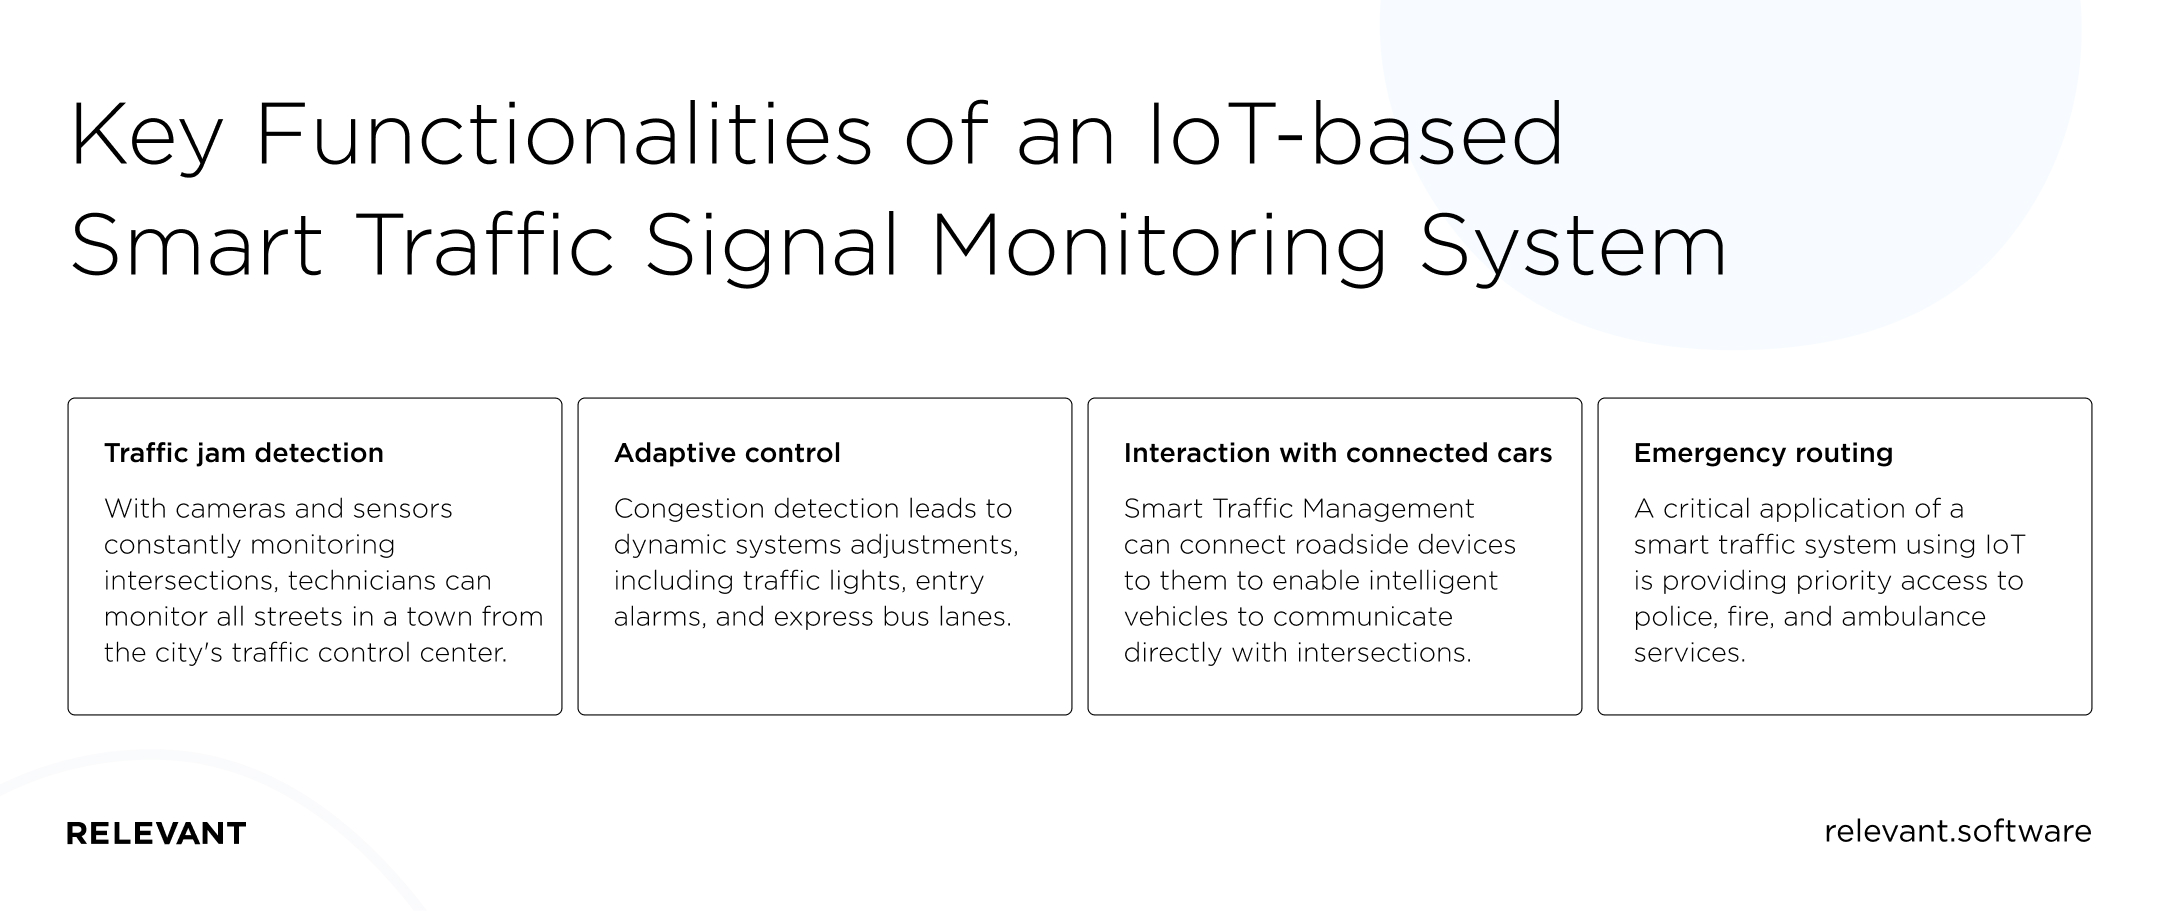 Key Functionalities of an IoT-based Smart Traffic signal Monitoring System